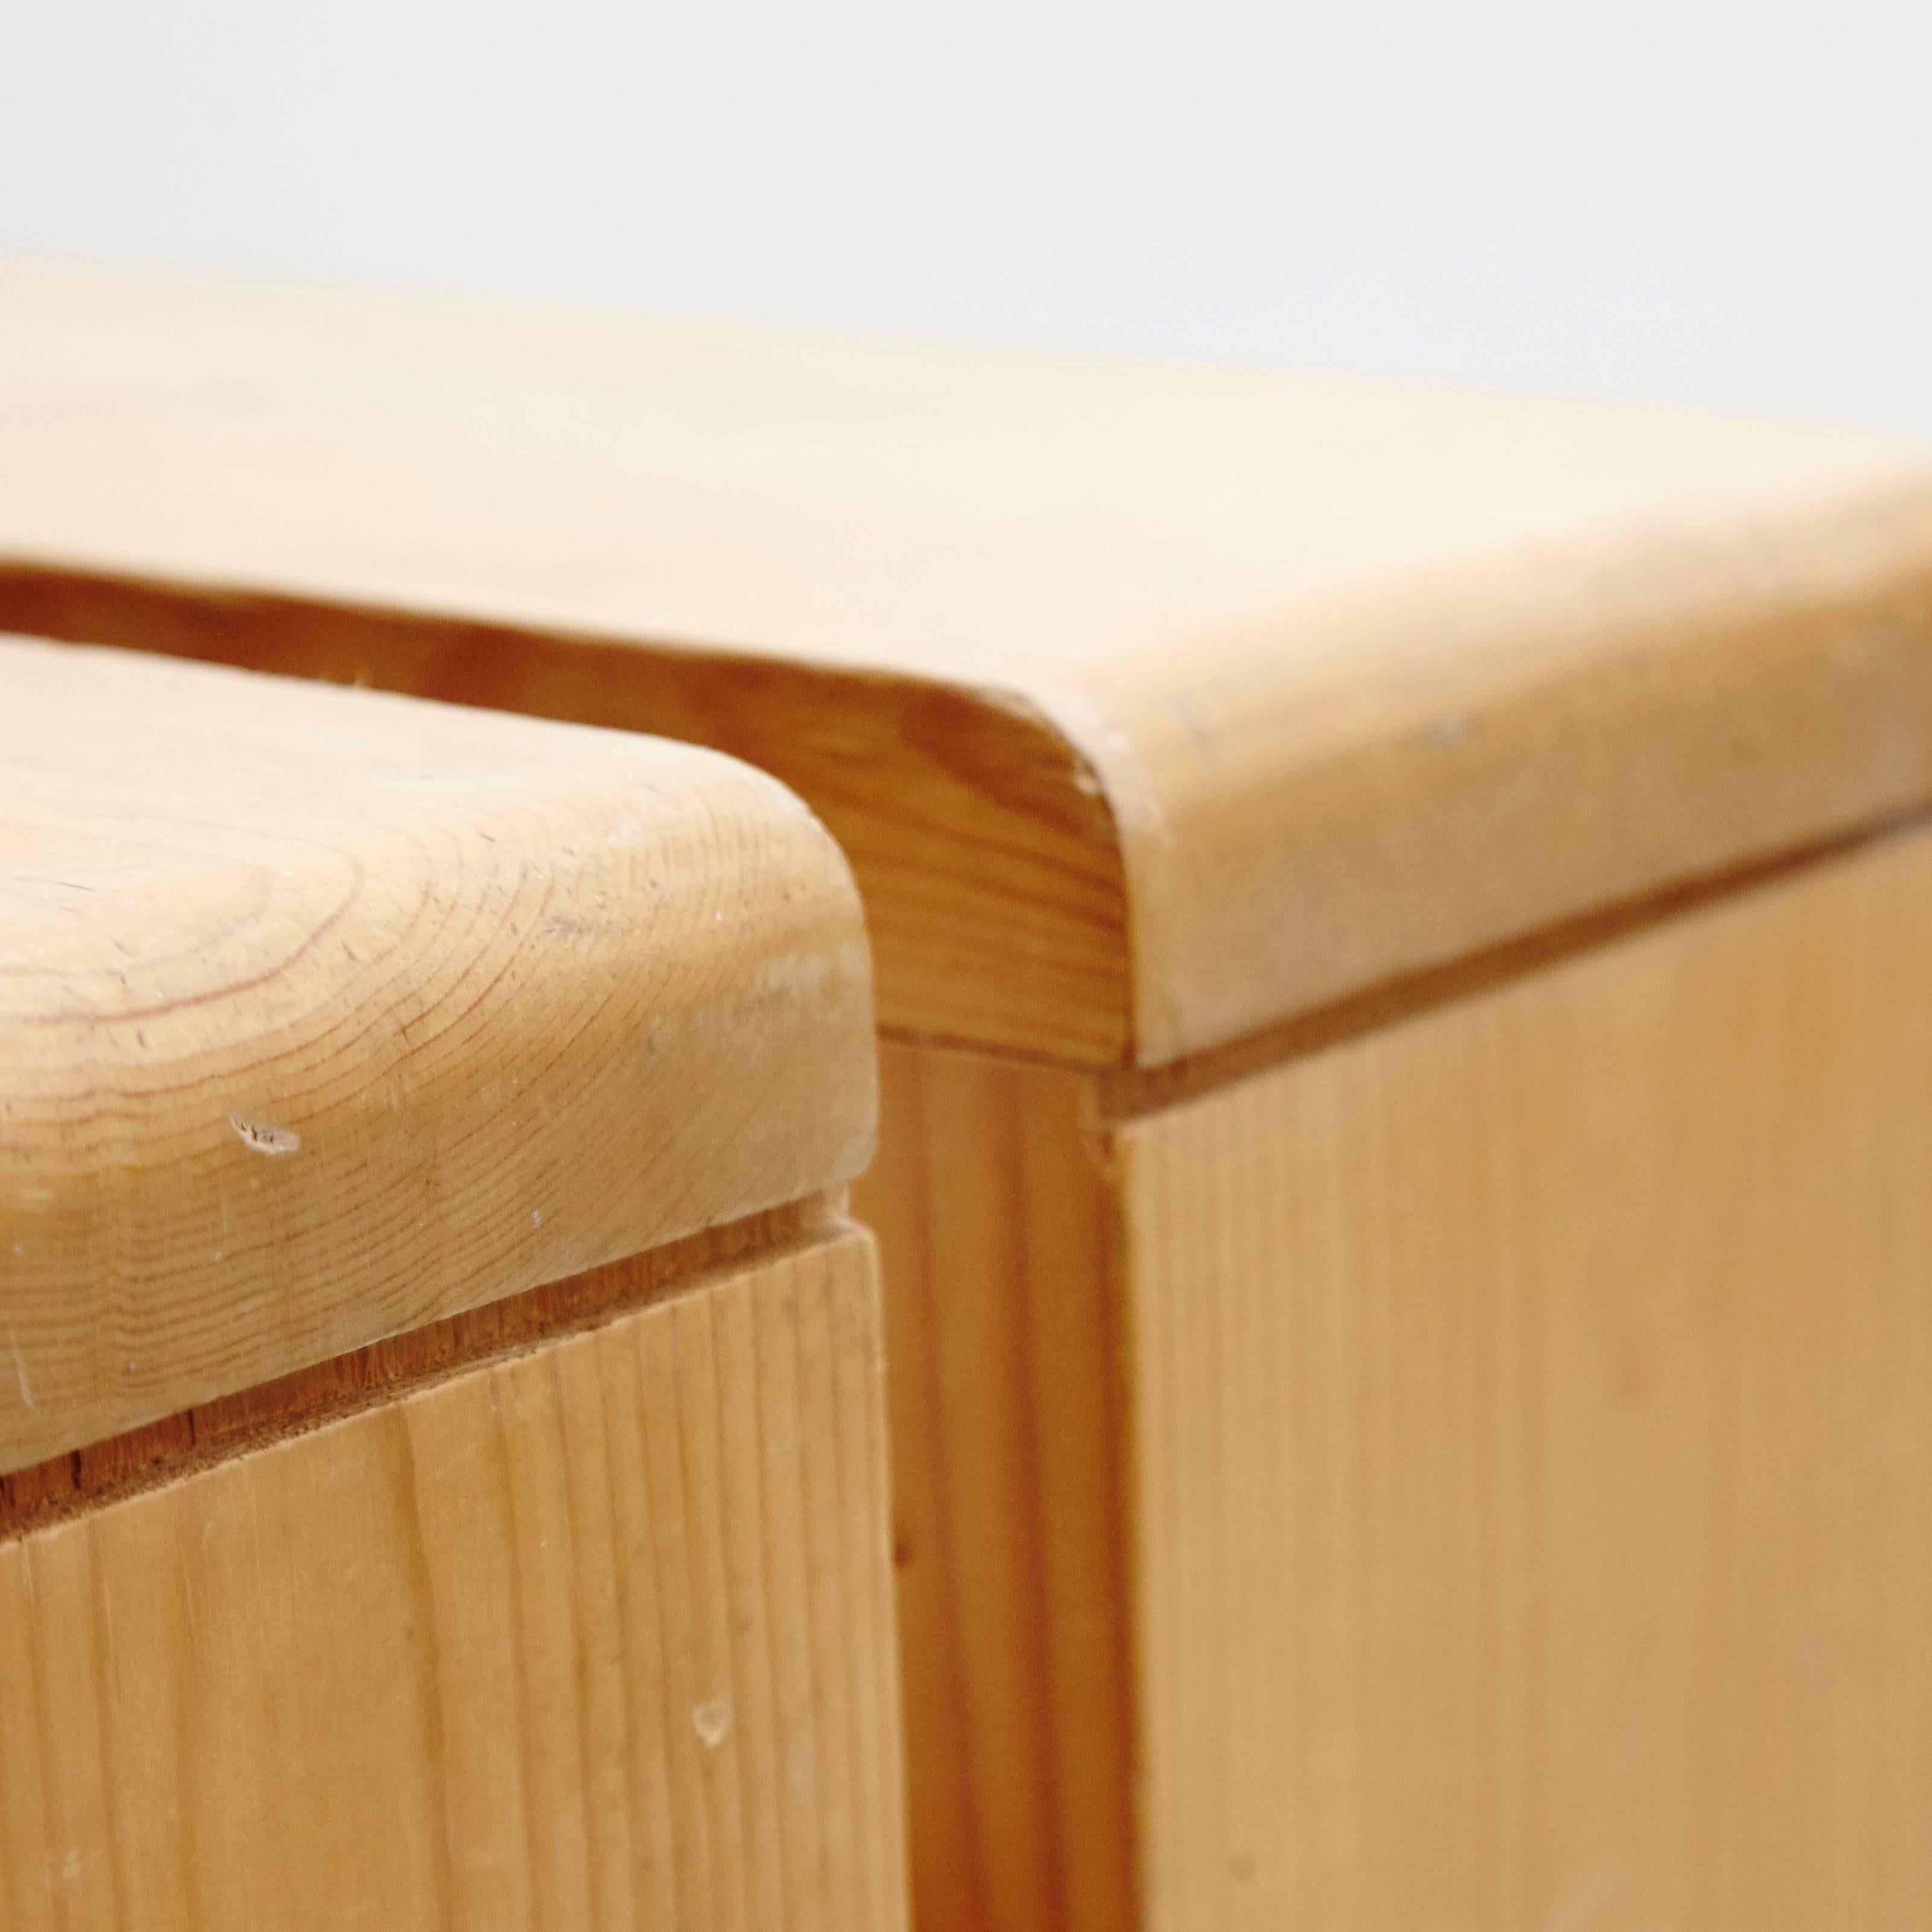 Pine Charlotte Perriand Bench for Les Arcs